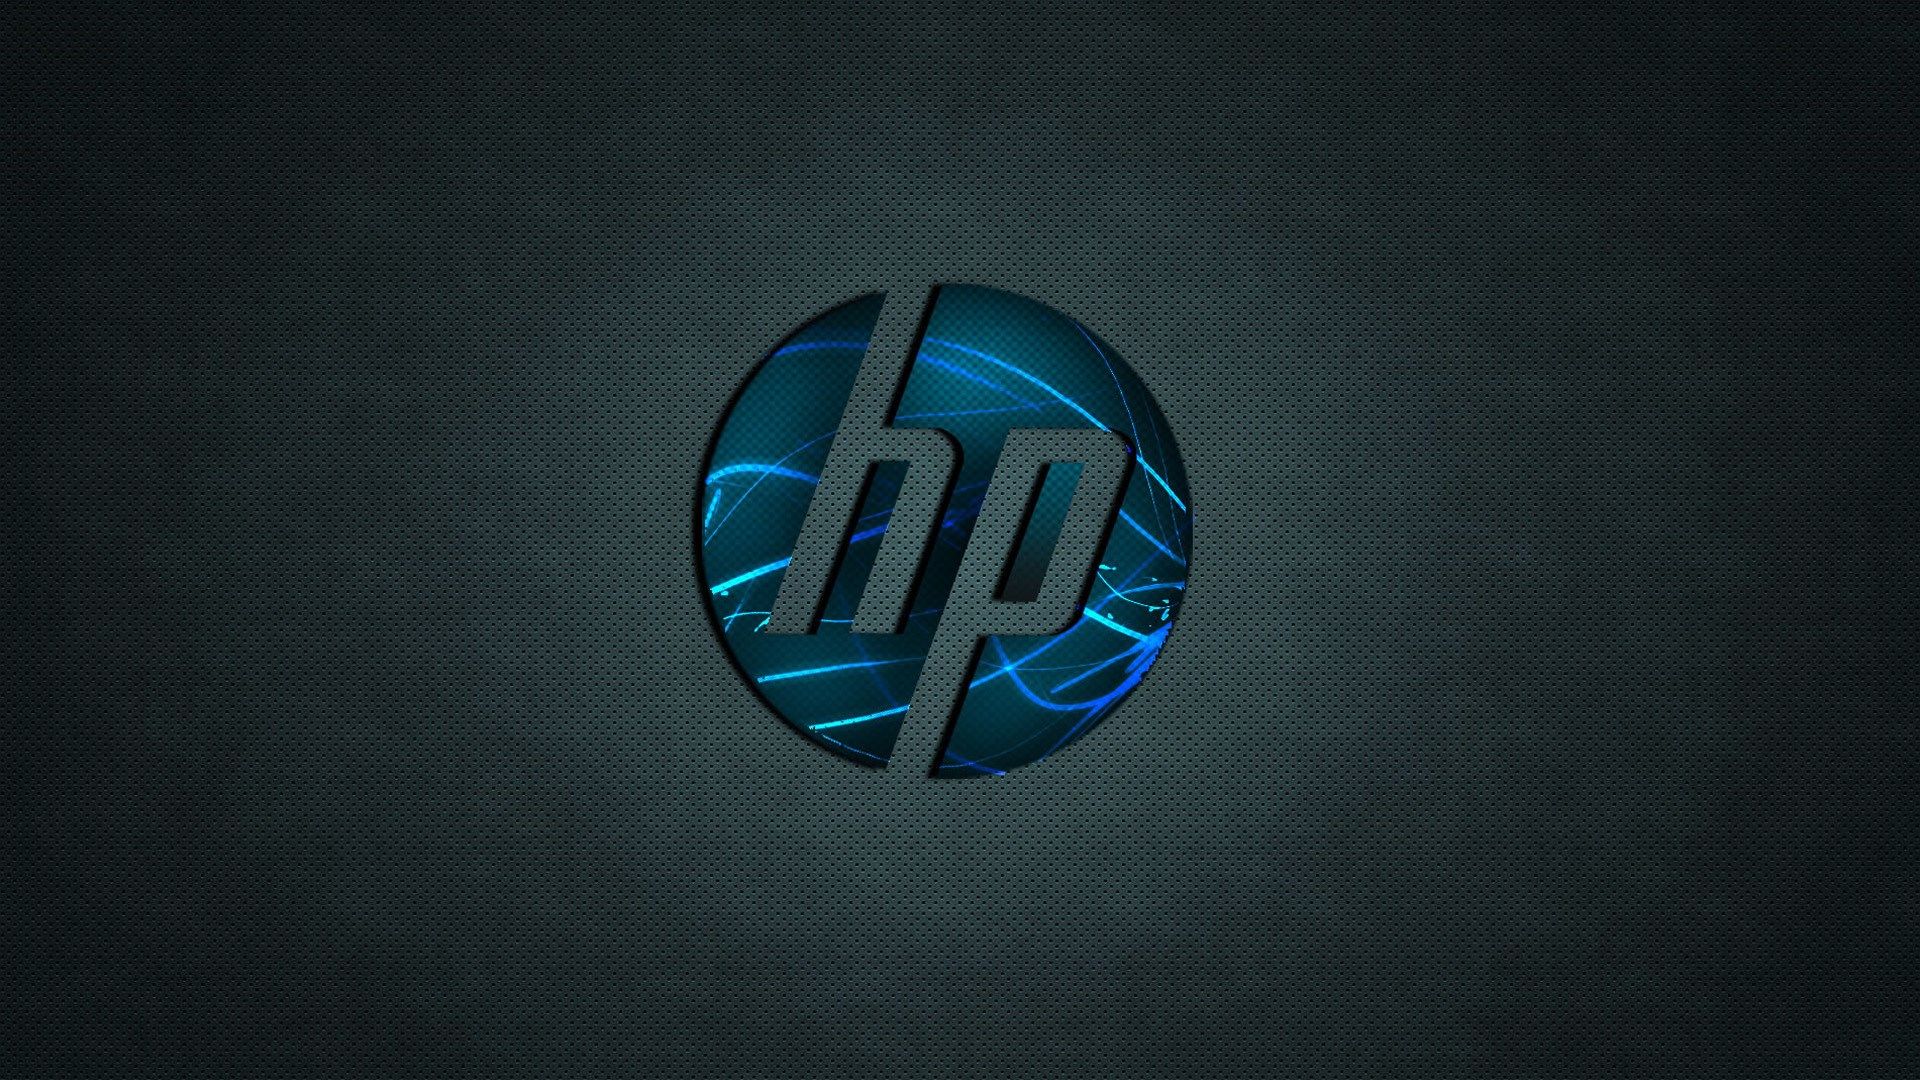 Hp Pavilion Wallpaper Image In Collection